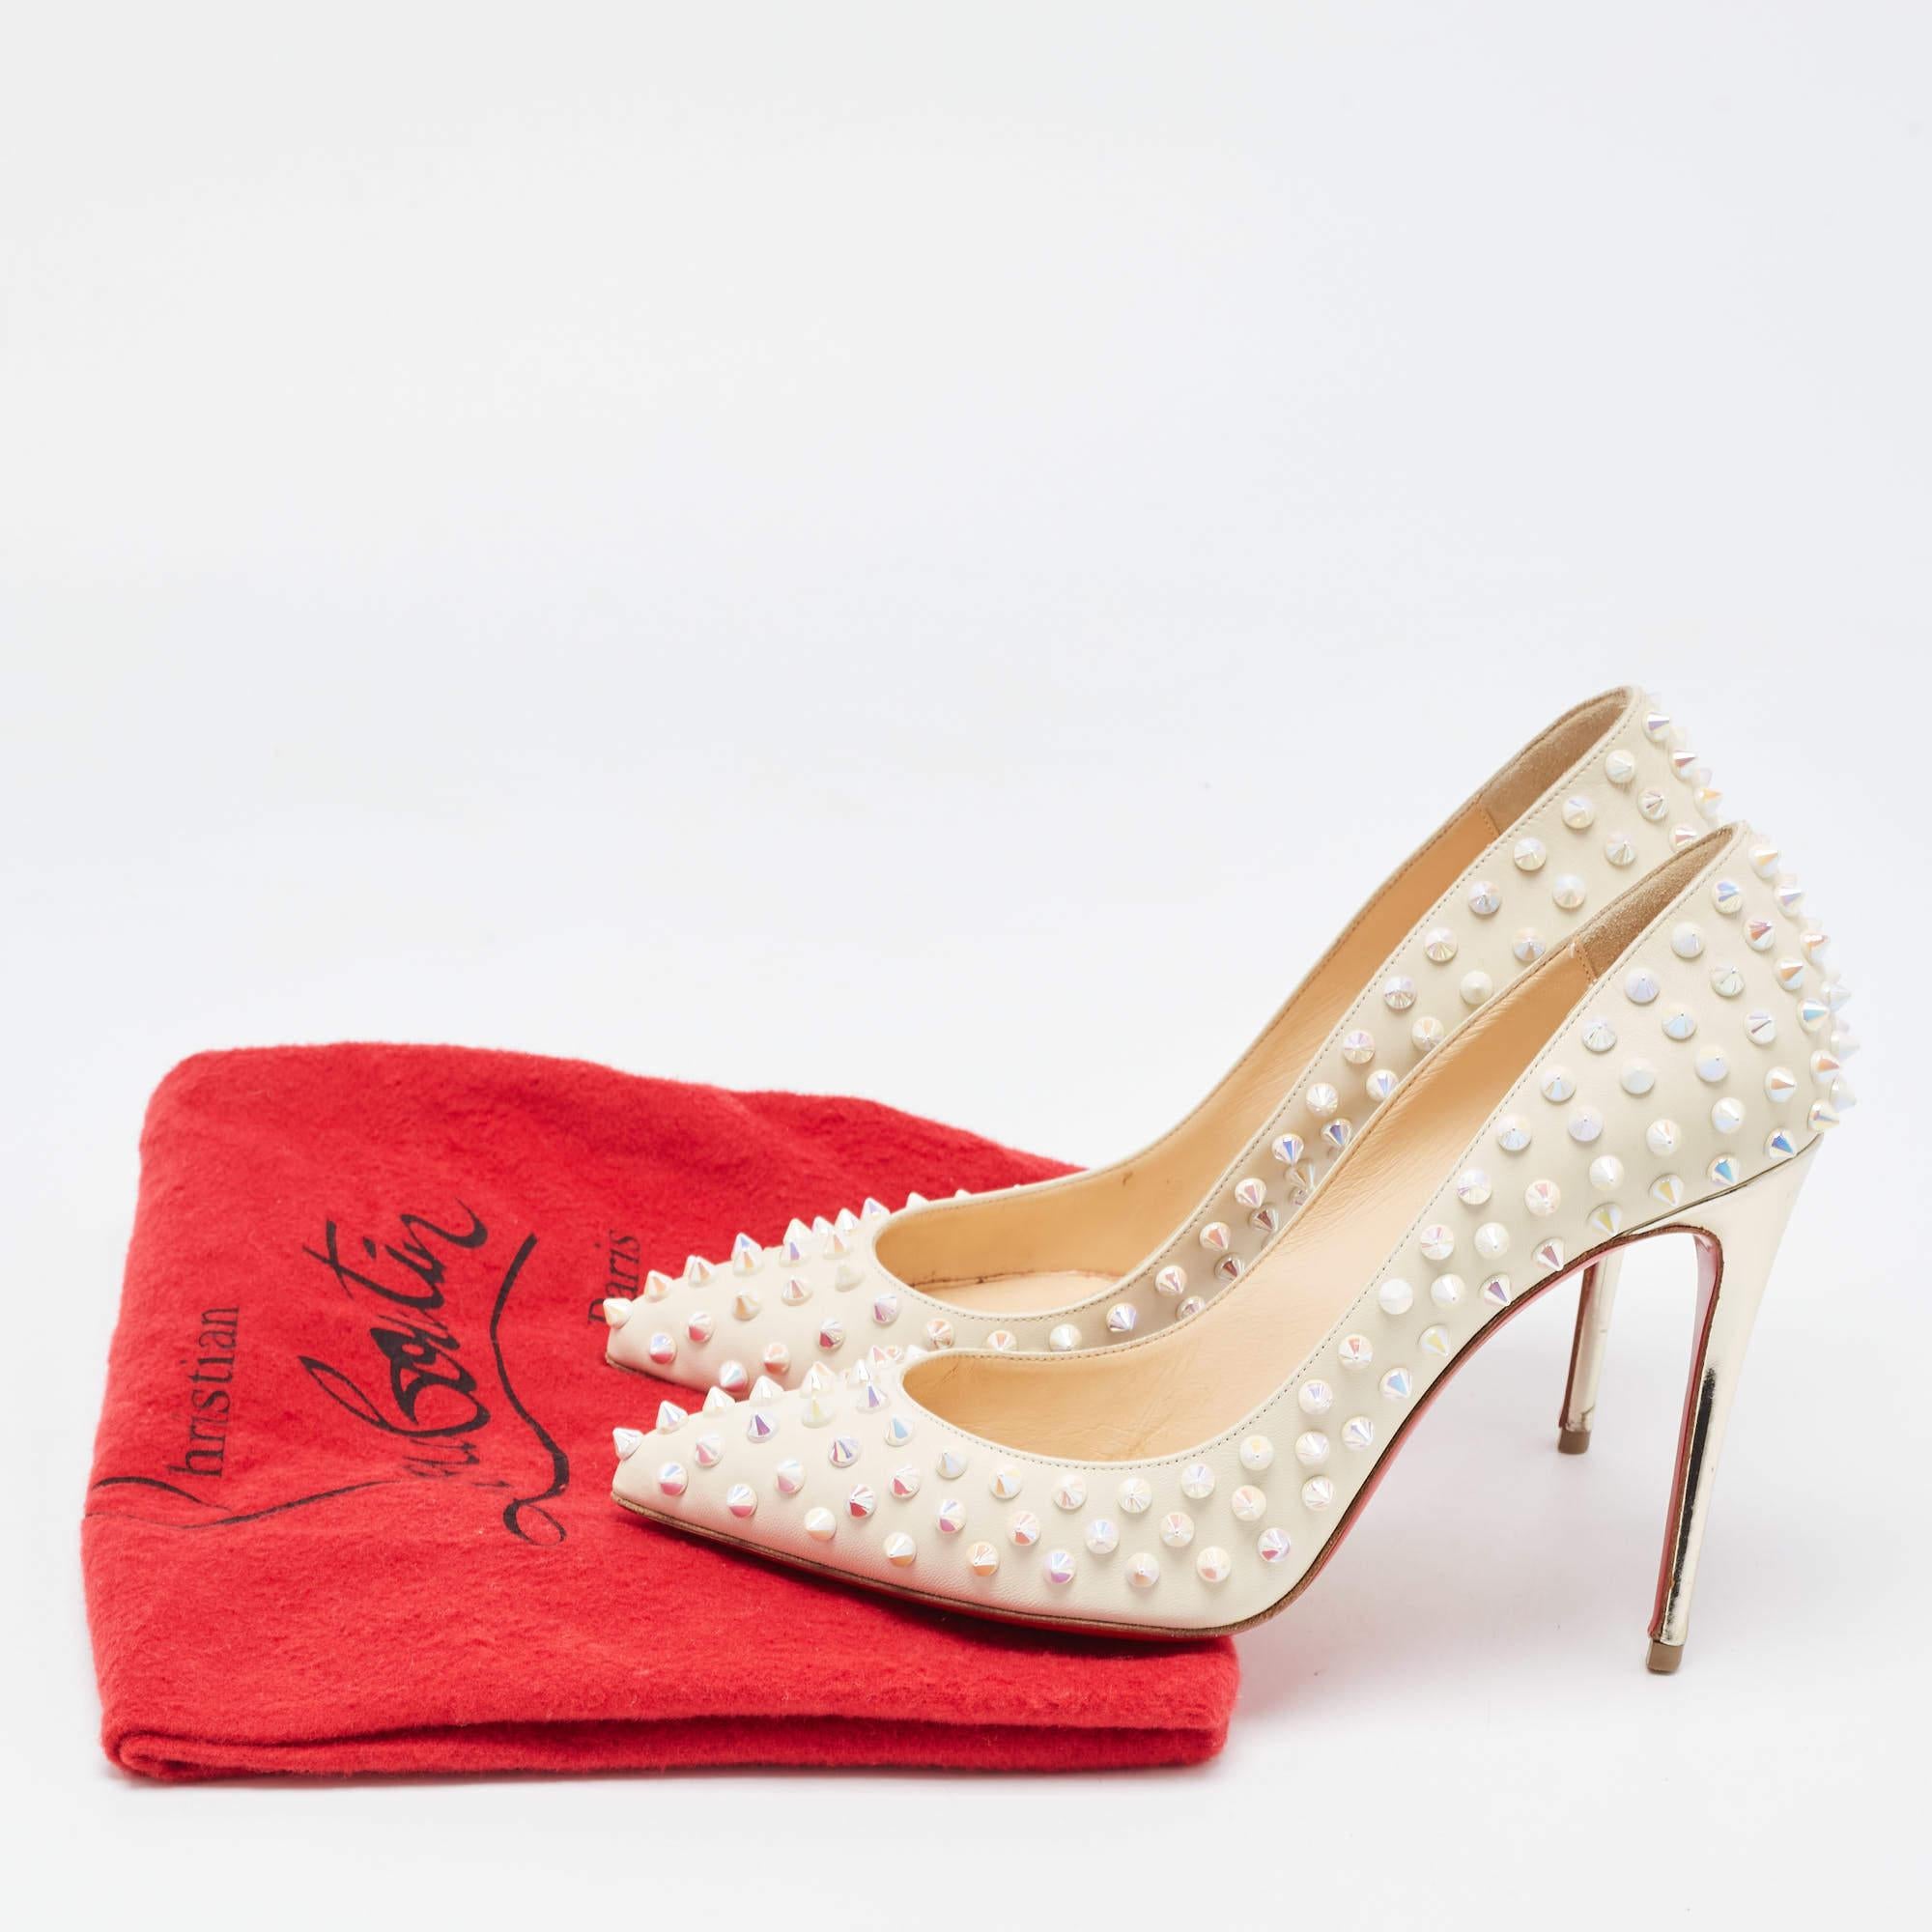 Christian Louboutin Cream Leather Pigalle Spikes Pumps Size 38 4